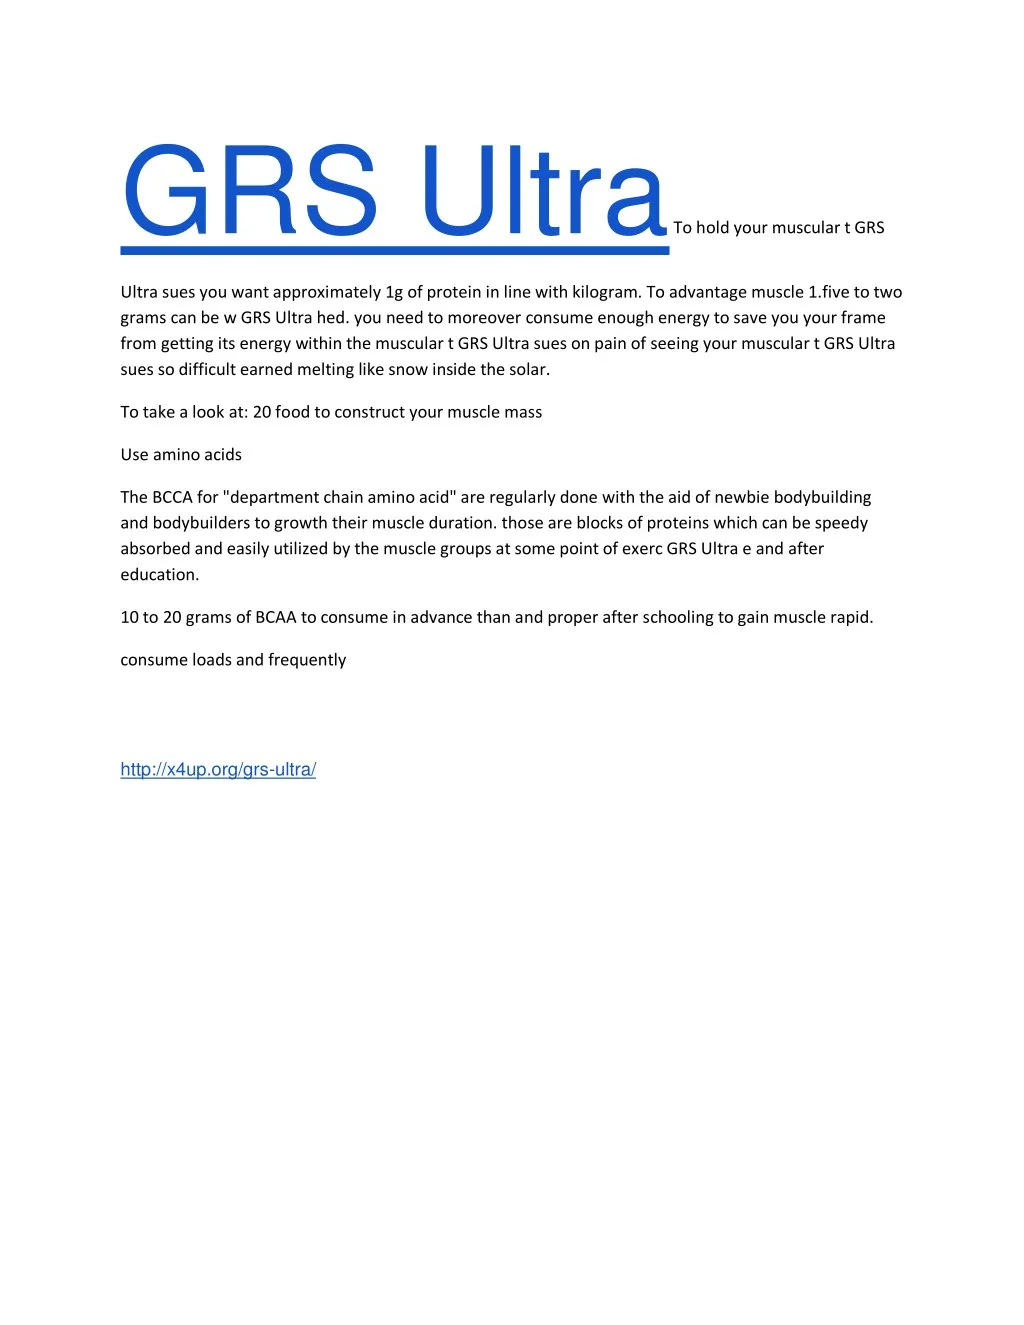 grs ultra to hold your muscular t grs